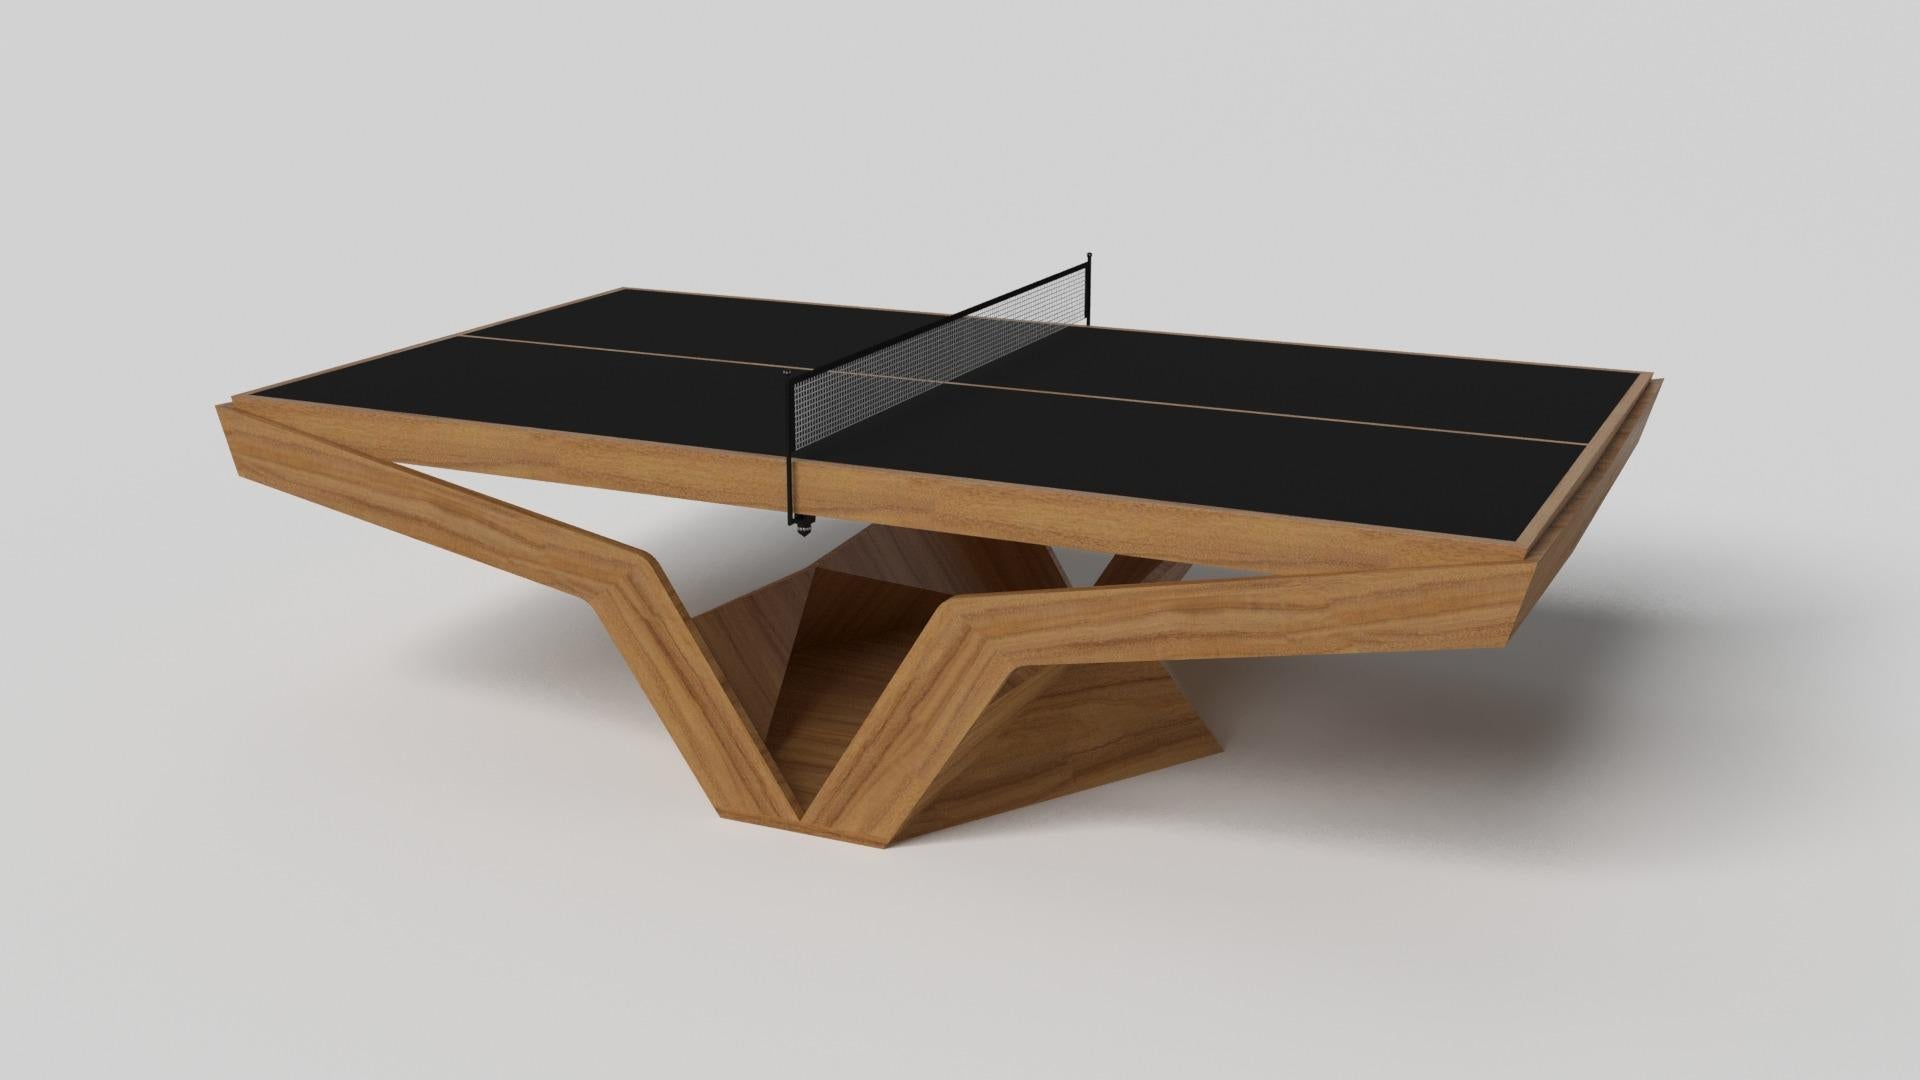 The Enzo table tennis table is Inspired by the aerodynamic angles of top-of-the-line European vehicles. Designed with sleek, V-shaped lines and a thoughtful use of negative space, this table boasts an energetic sense of spirit while epitomizing the